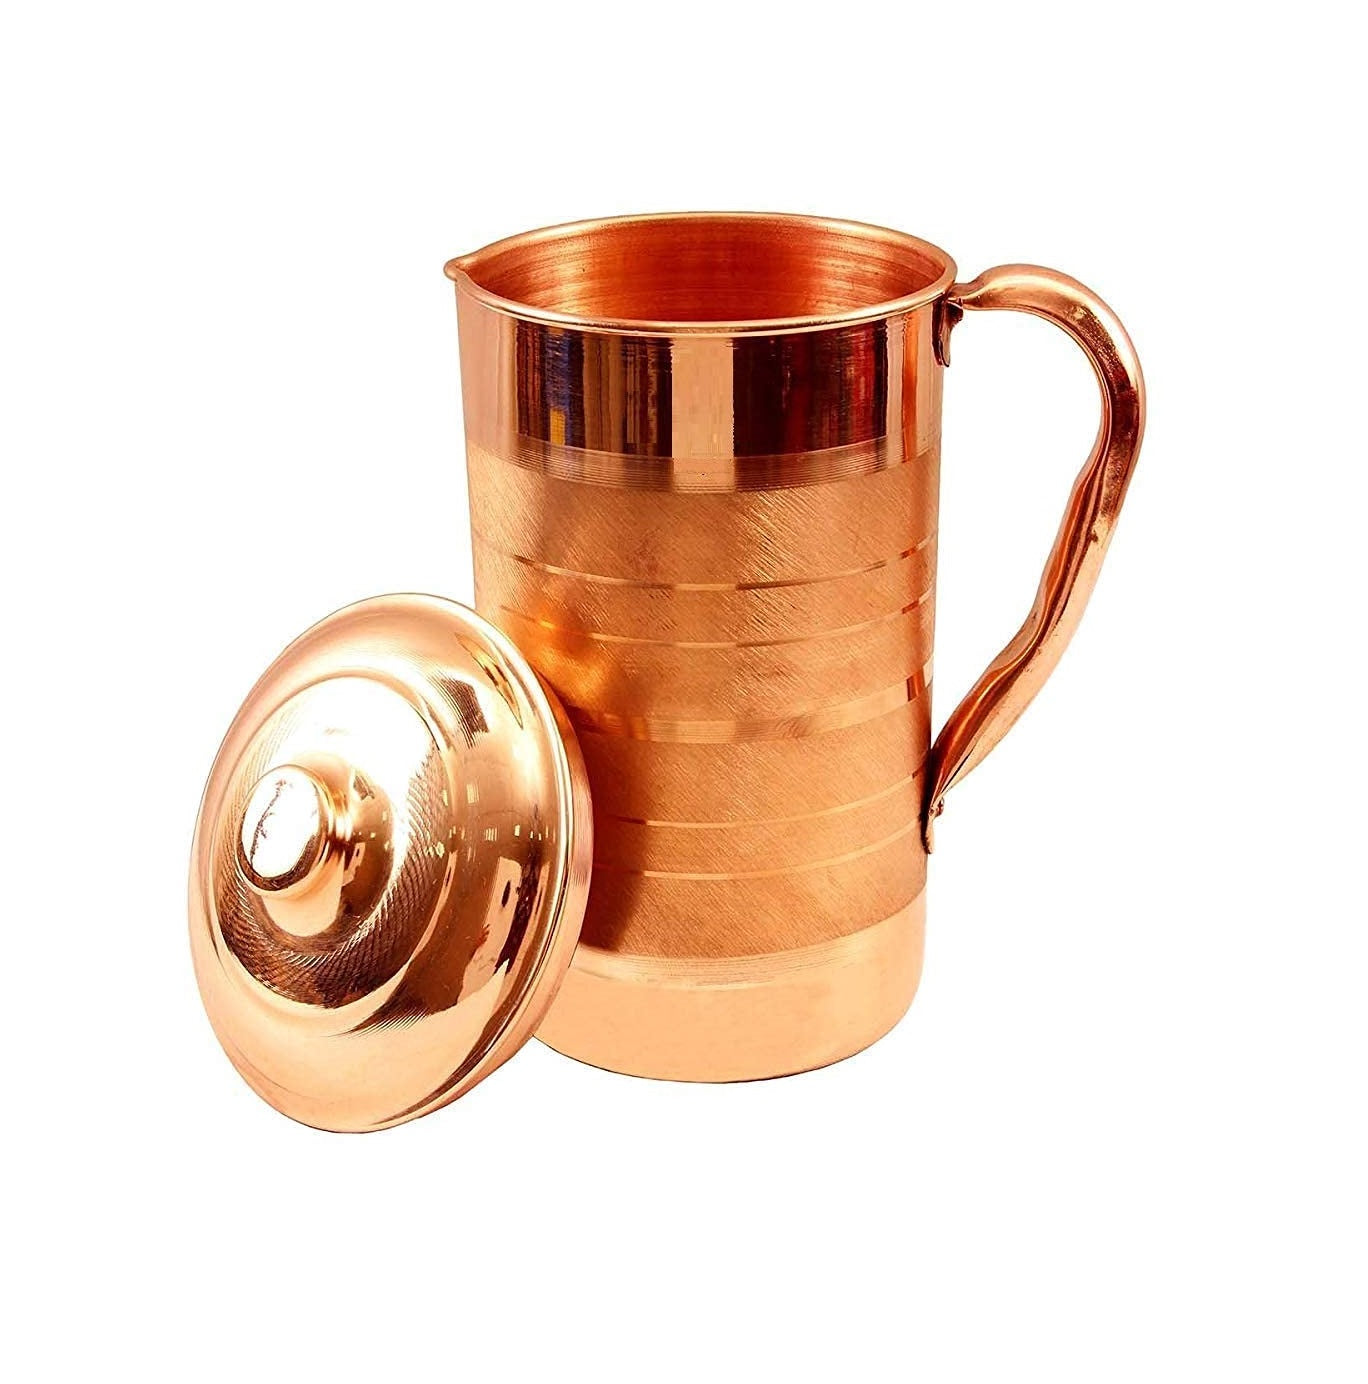 Copper Pitcher for Ayurveda Health Benefit Smooth Finished -2000 ml